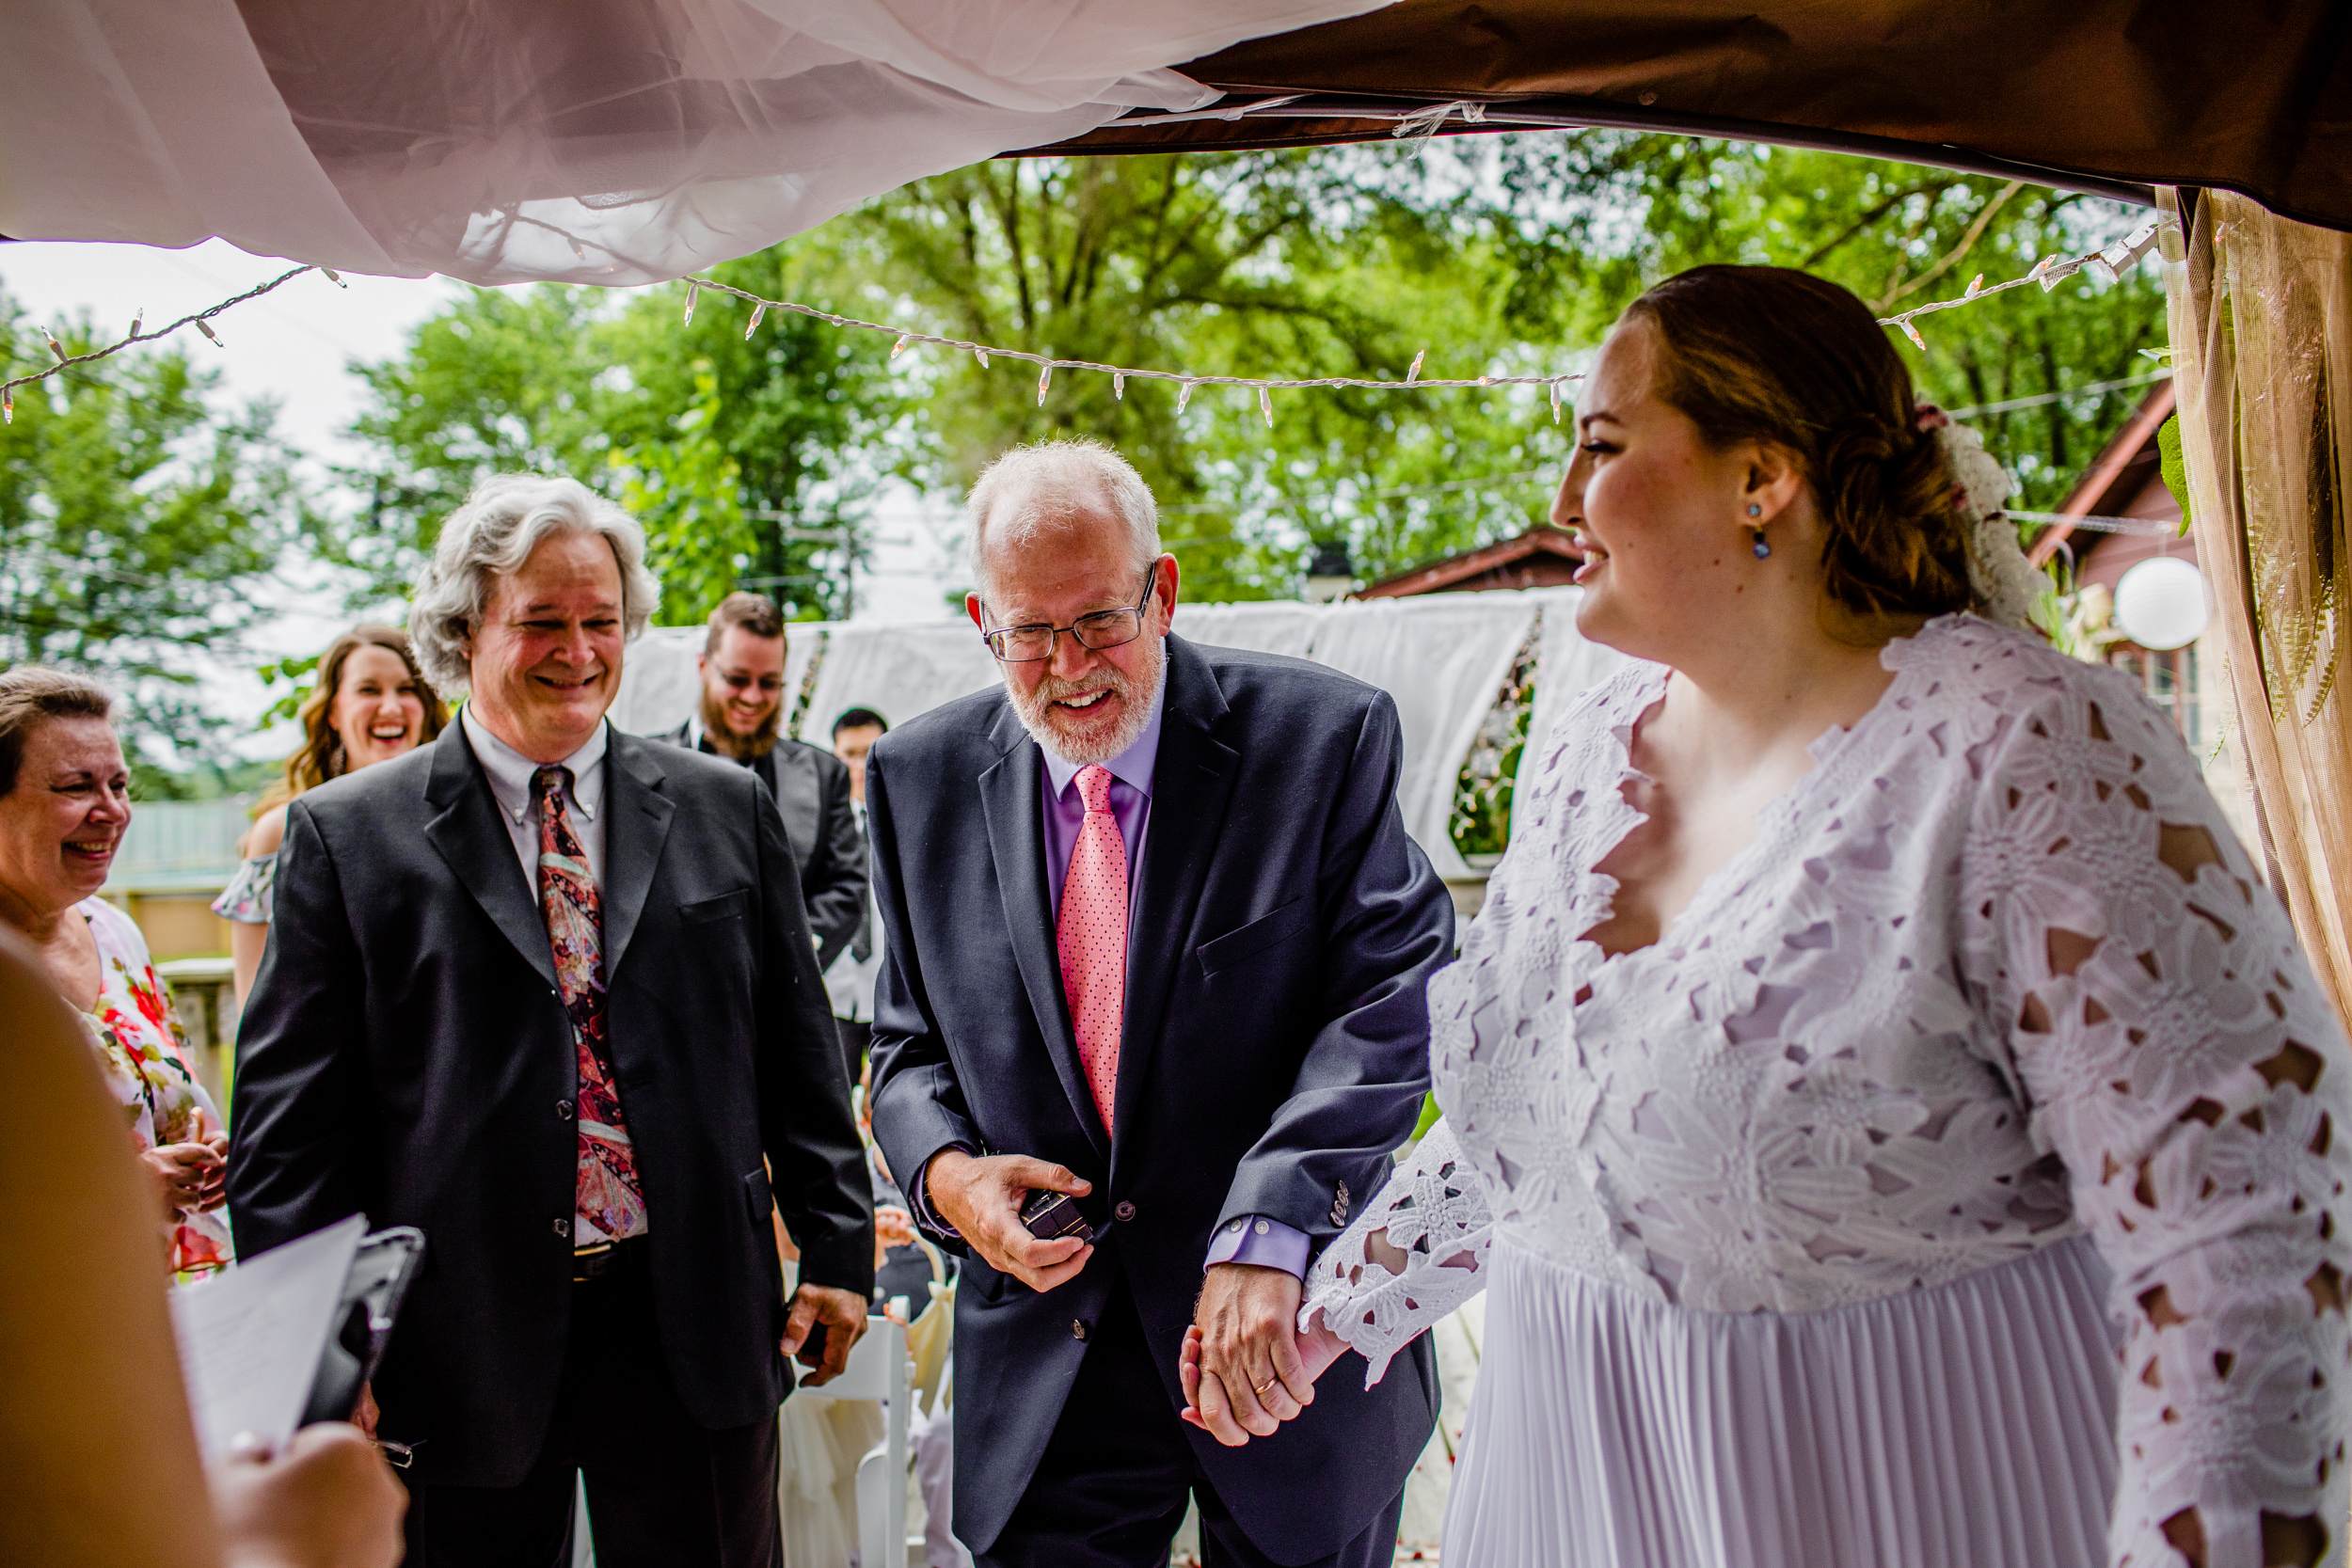 A bride walks down the aisle with her father during a New Lenox backyard wedding.